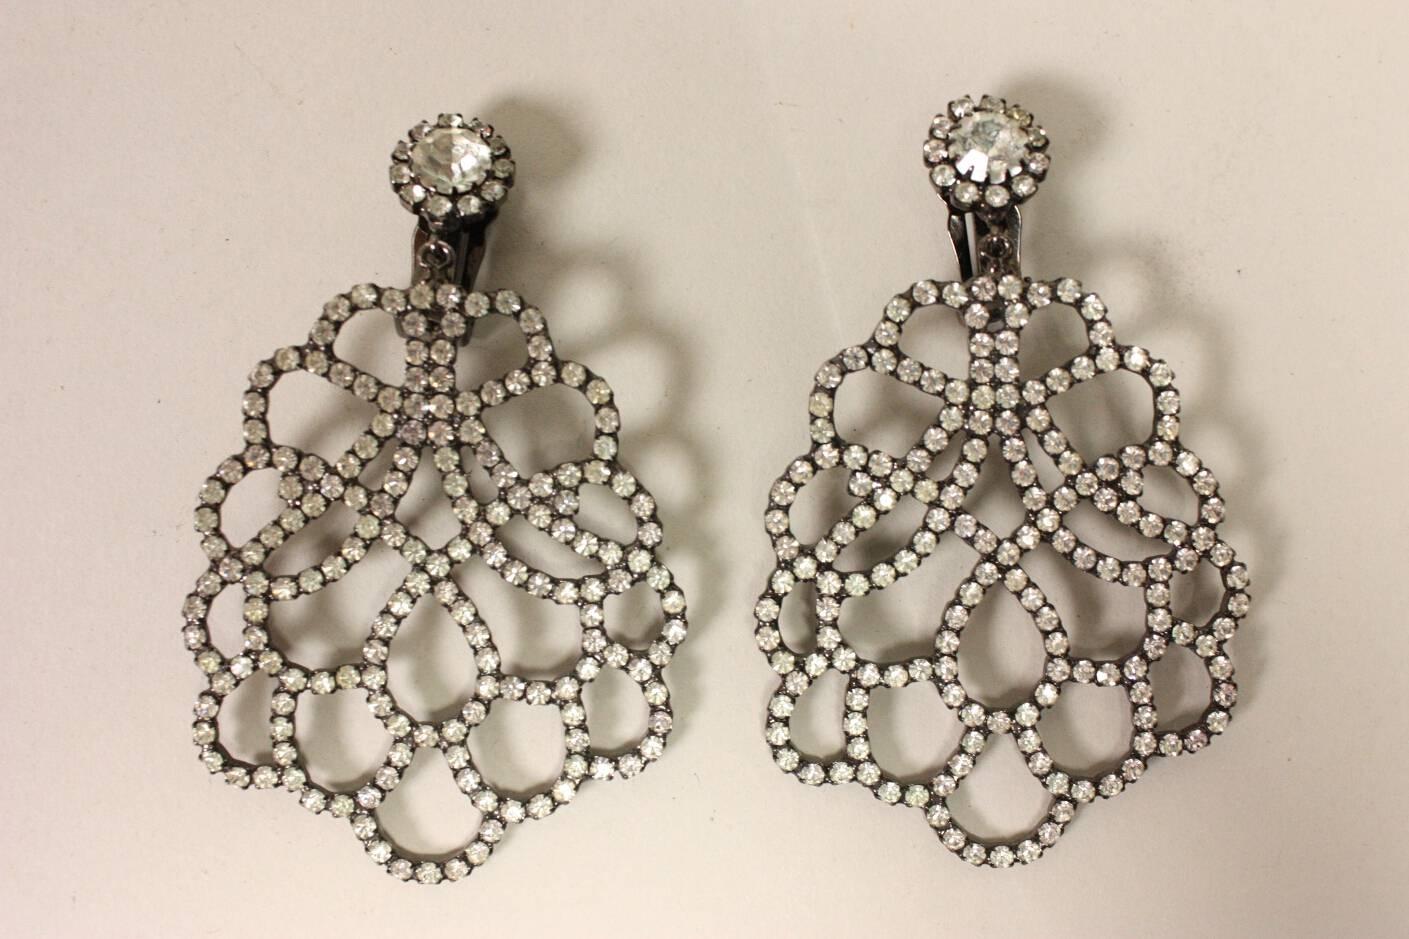 Vintage earrings from Kenneth Jay Lane likely date to the 1980's and are made of darkened silver-toned metal.  They feature clear rhinestones that are pave-set in a lattice pattern.  Clip backs. 

Earring measures 3.25